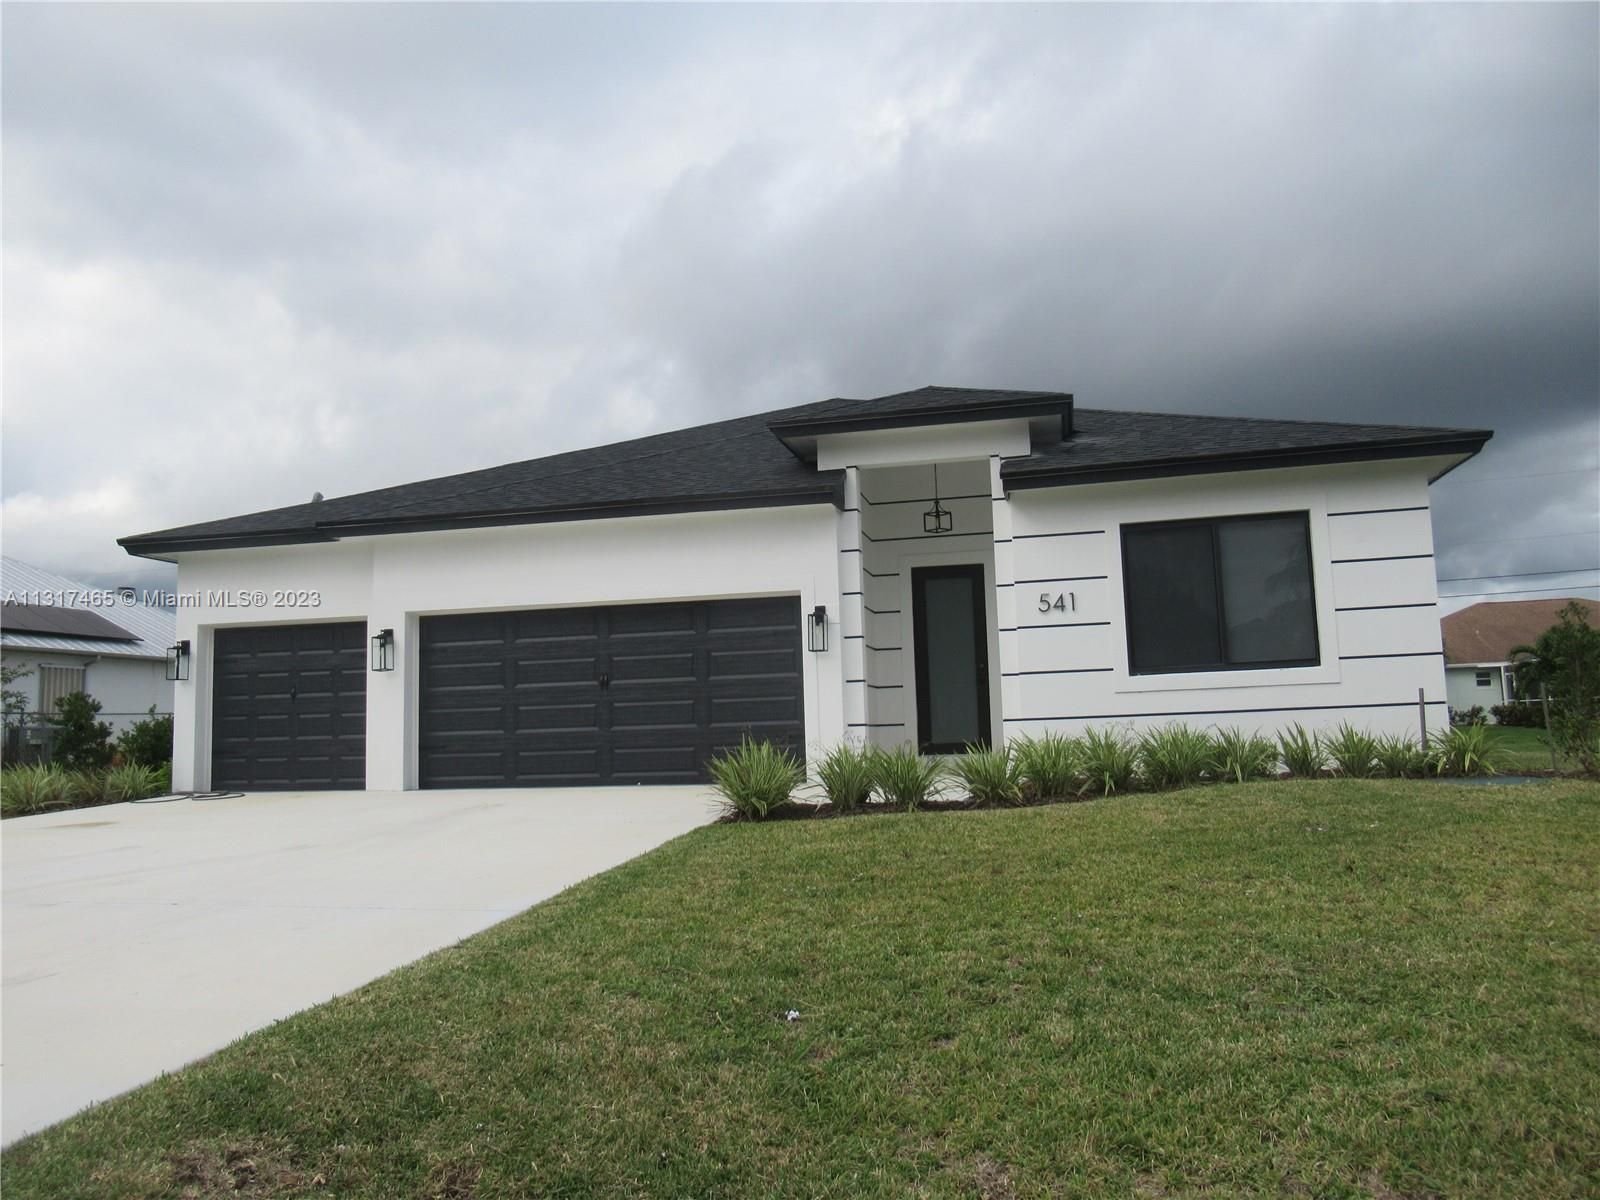 Real estate property located at 541 Lawler Ave, St Lucie County, Port St. Lucie, FL